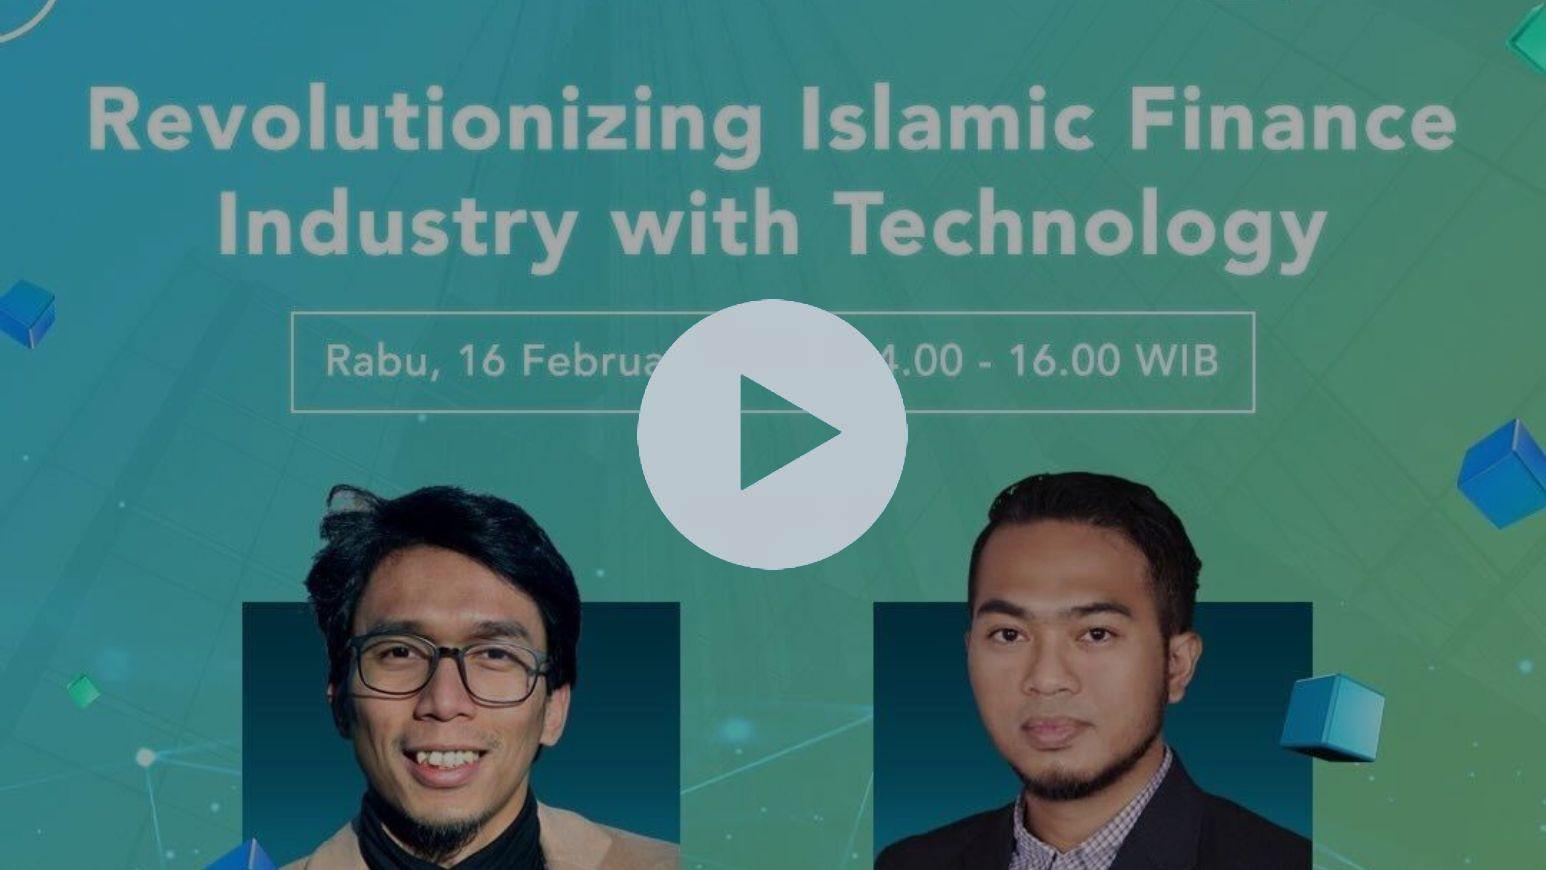 Revolutionizing Islamic Finance Industry with Technology